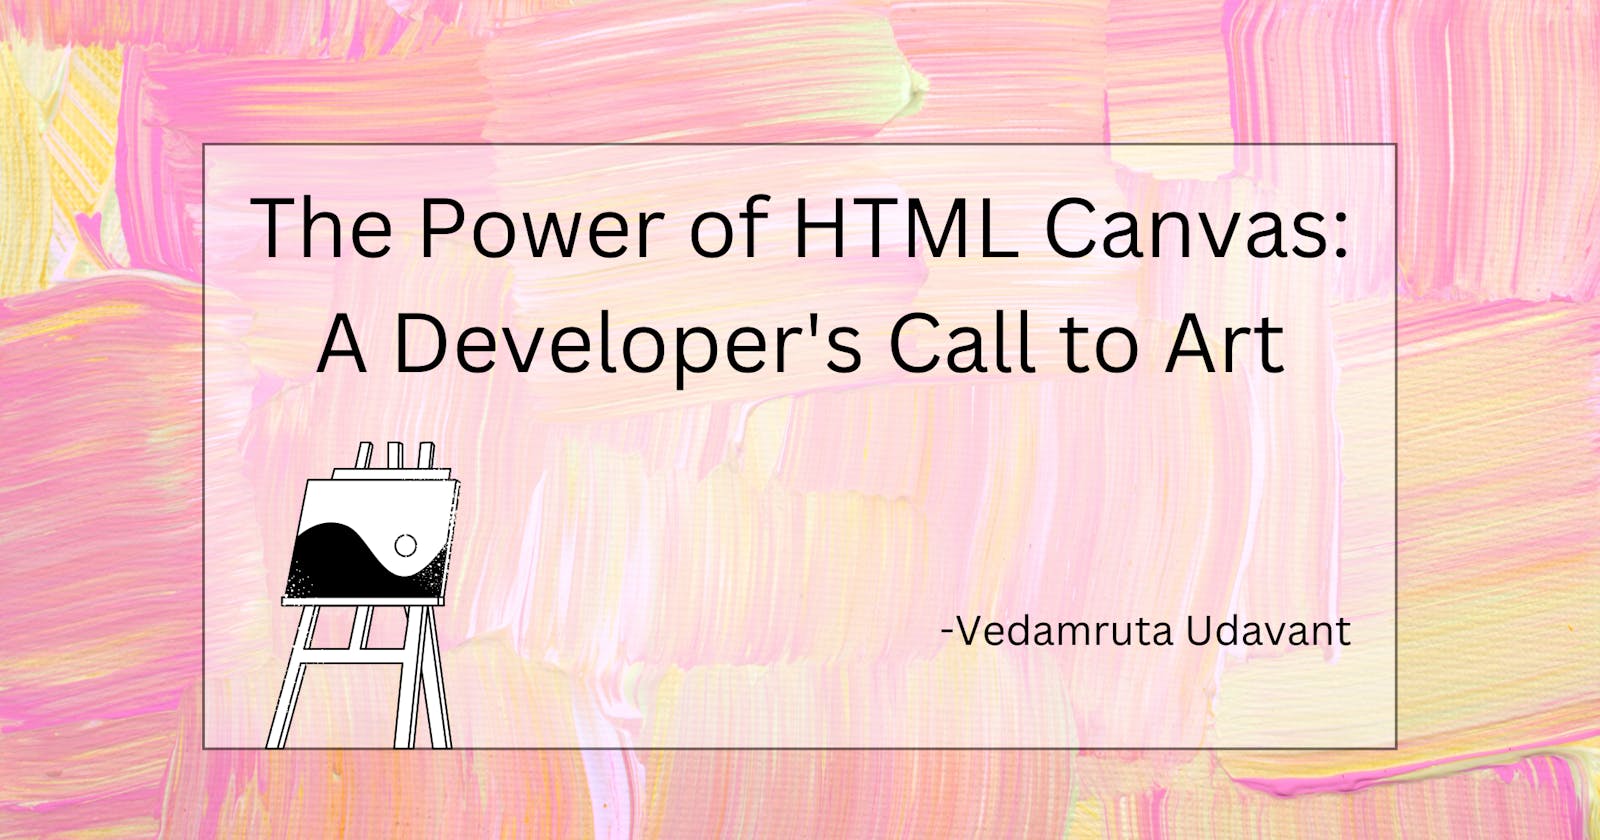 The Power of HTML Canvas: A Developer's Call to Art